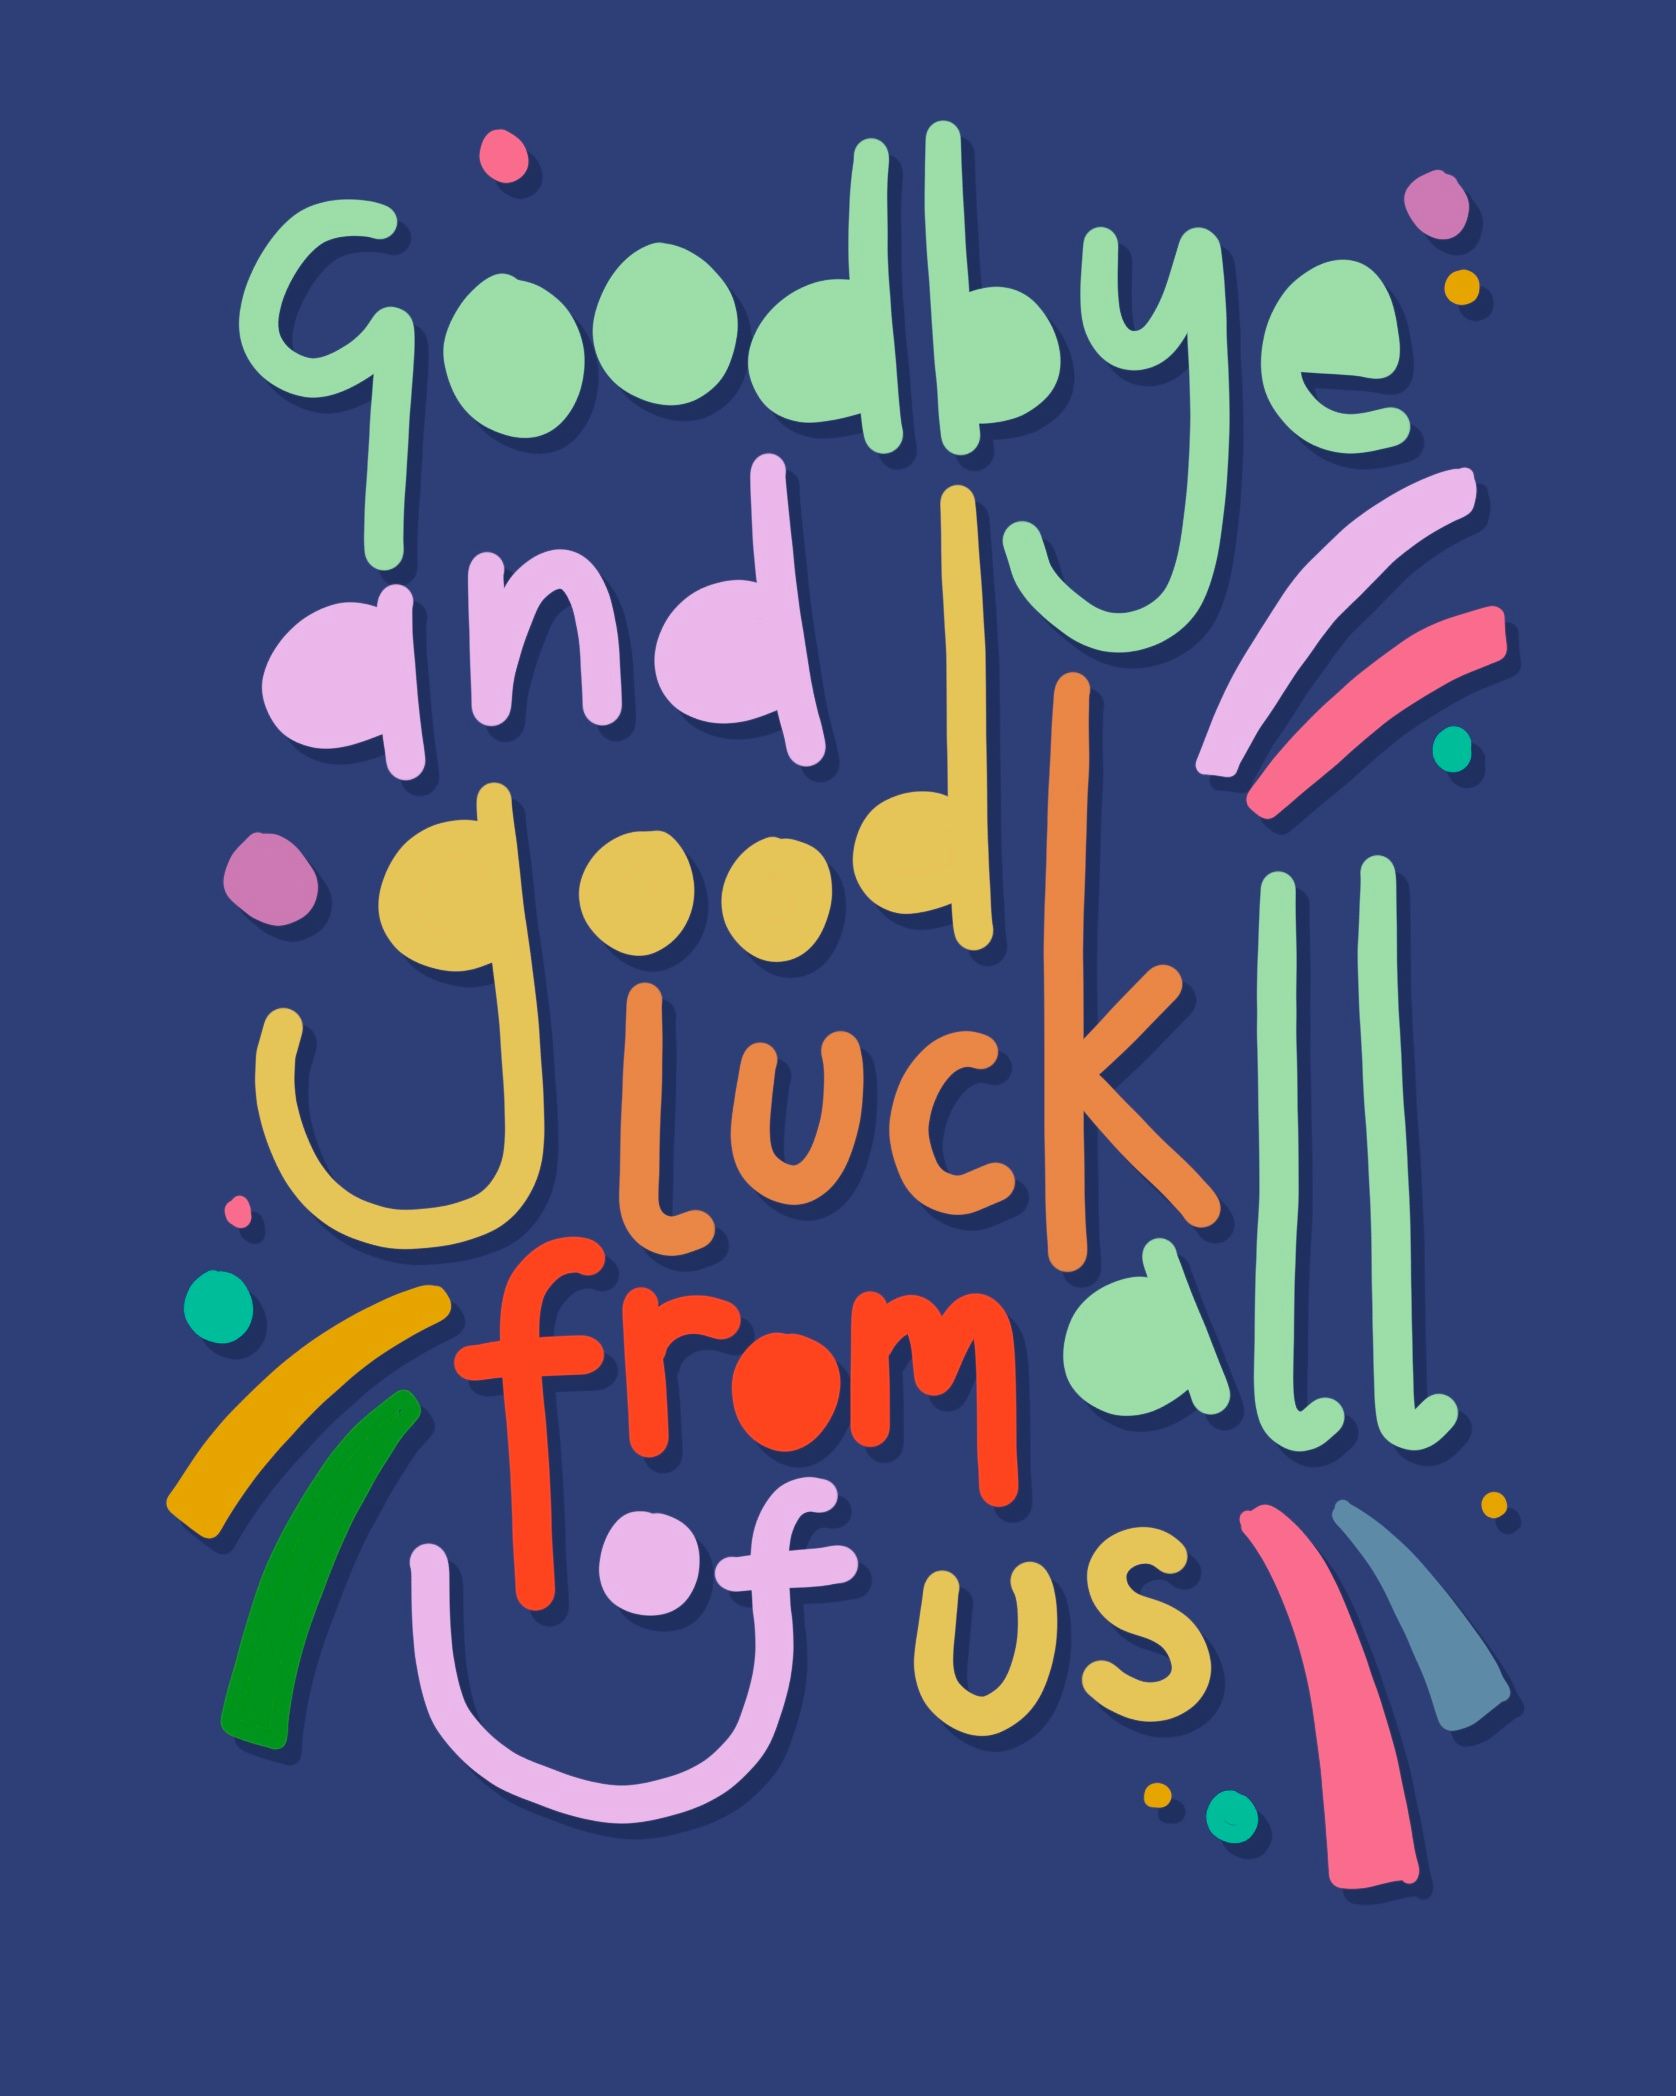 Card design "goodbye and good luck from all of us office leaving card"